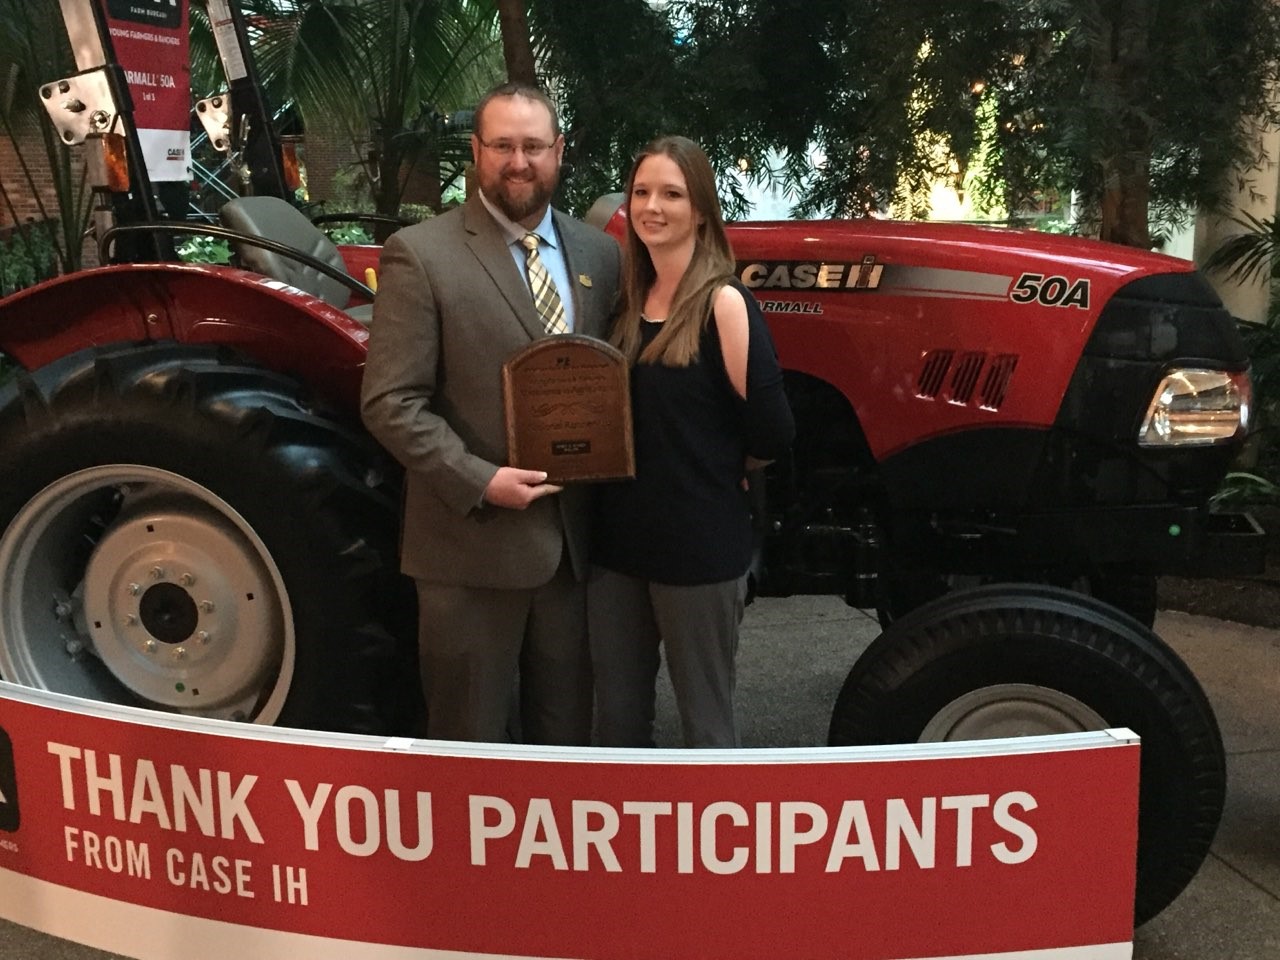 Casey and Stacey Phillips of Virginia recently received a new Farmall 50A tractor from Case IH